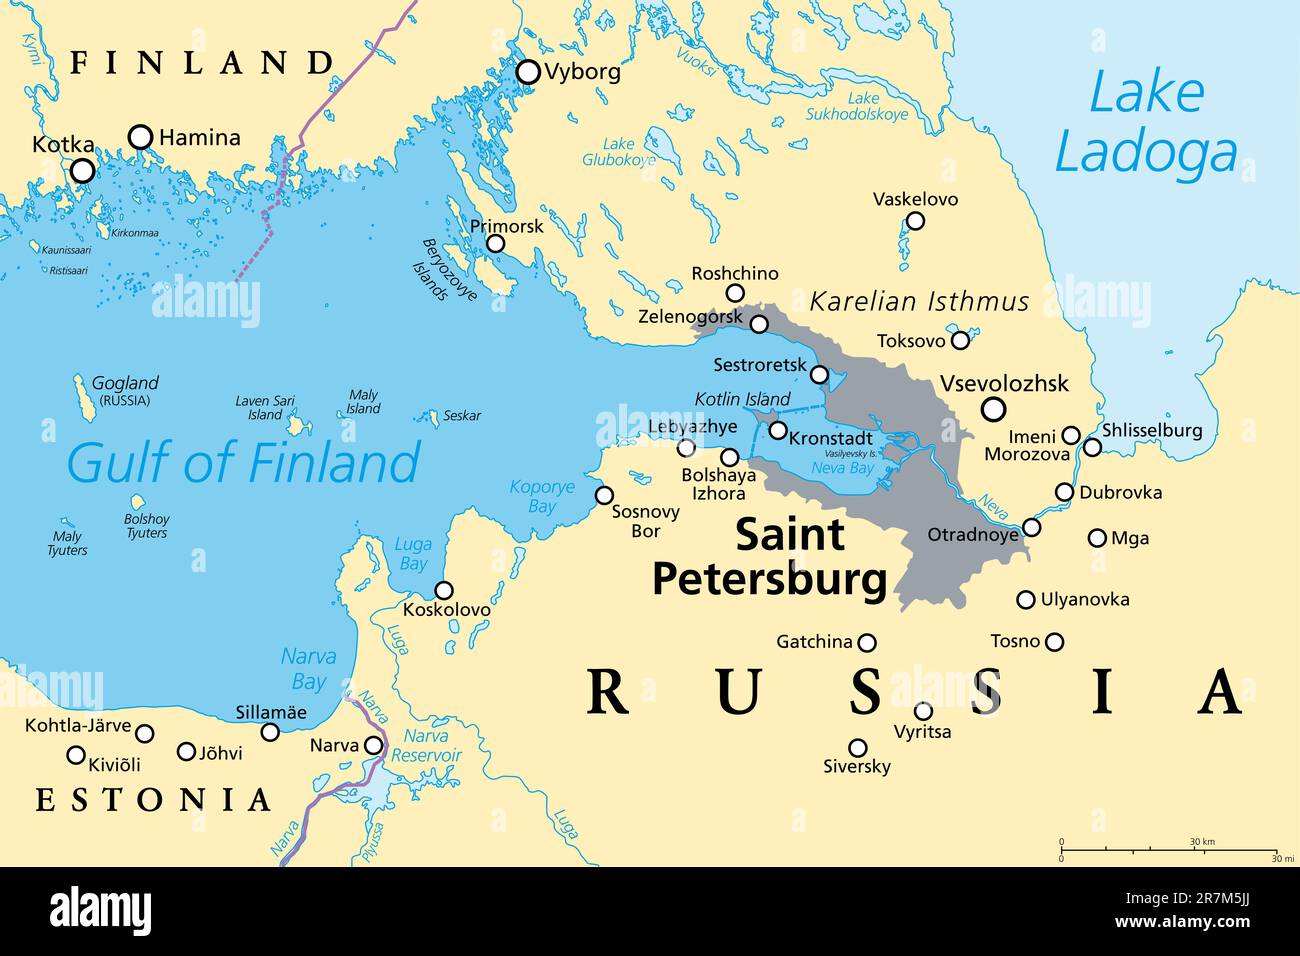 Saint Petersburg area, political map. Second-largest city in Russia, formerly known as Petrograd and later Leningrad. Situated on the Neva River. Stock Photo